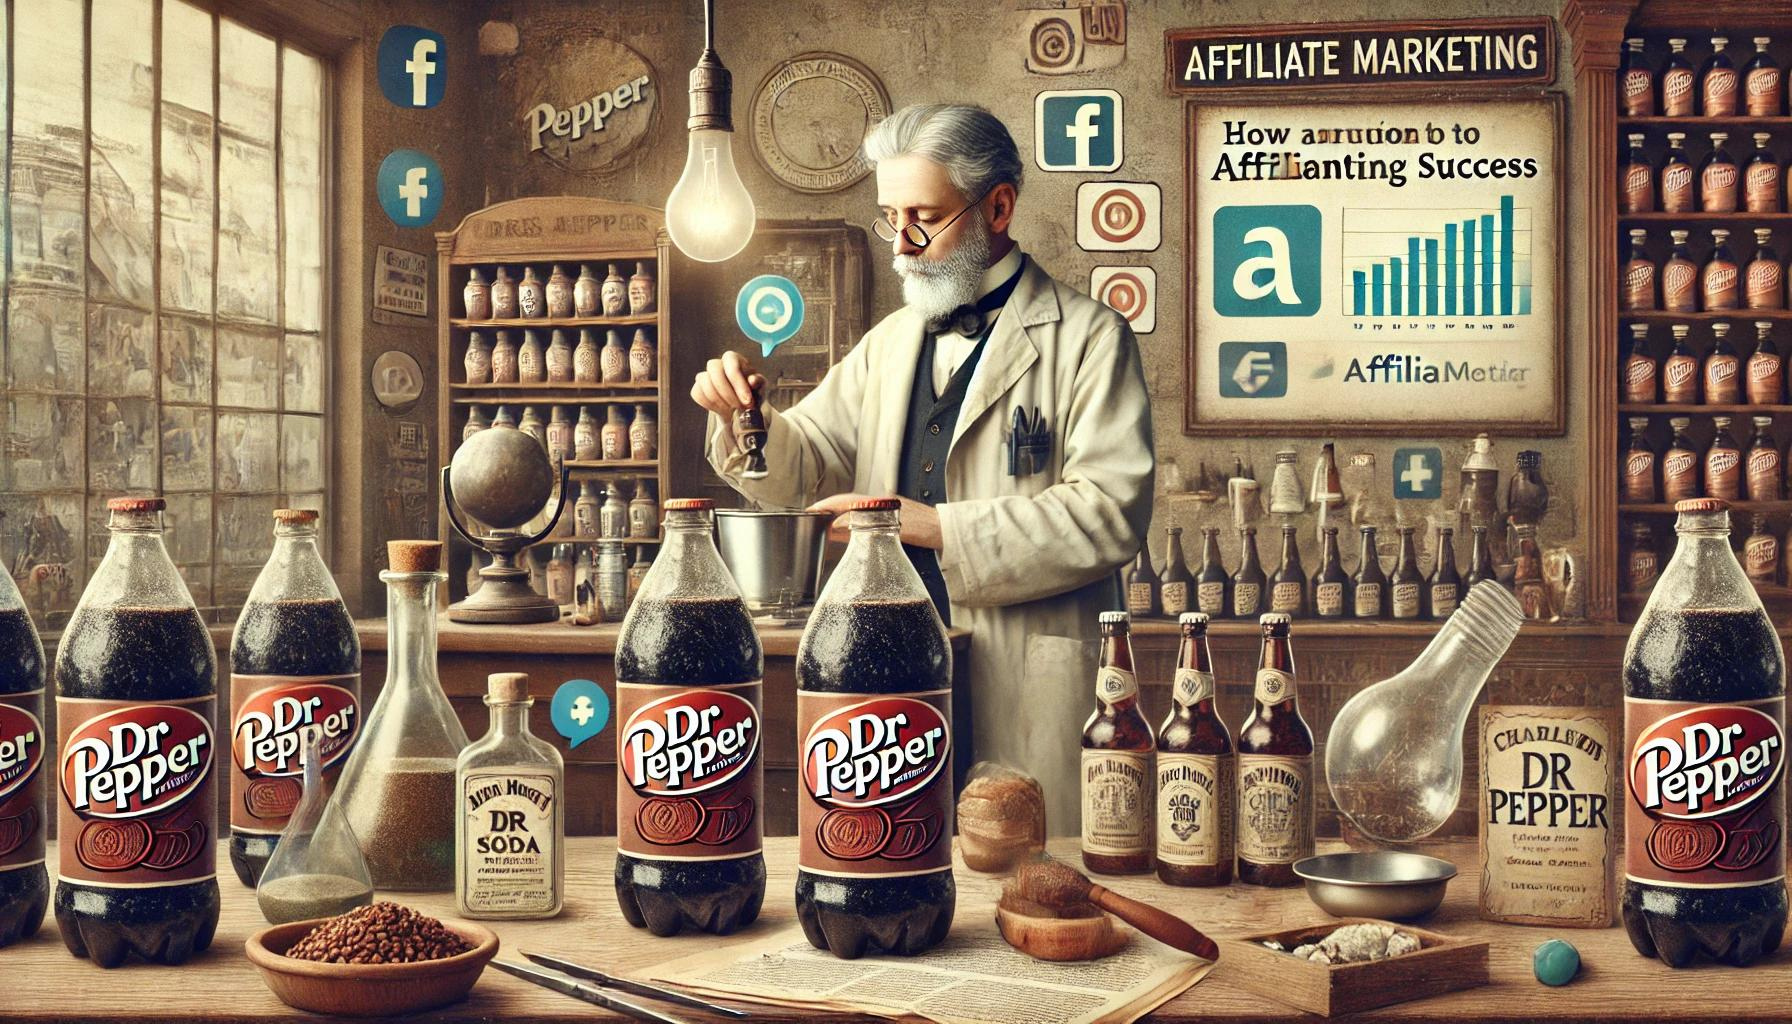 From Snubbed to Success: Dr Pepper’s Marketing Lesson for Affiliate Marketers